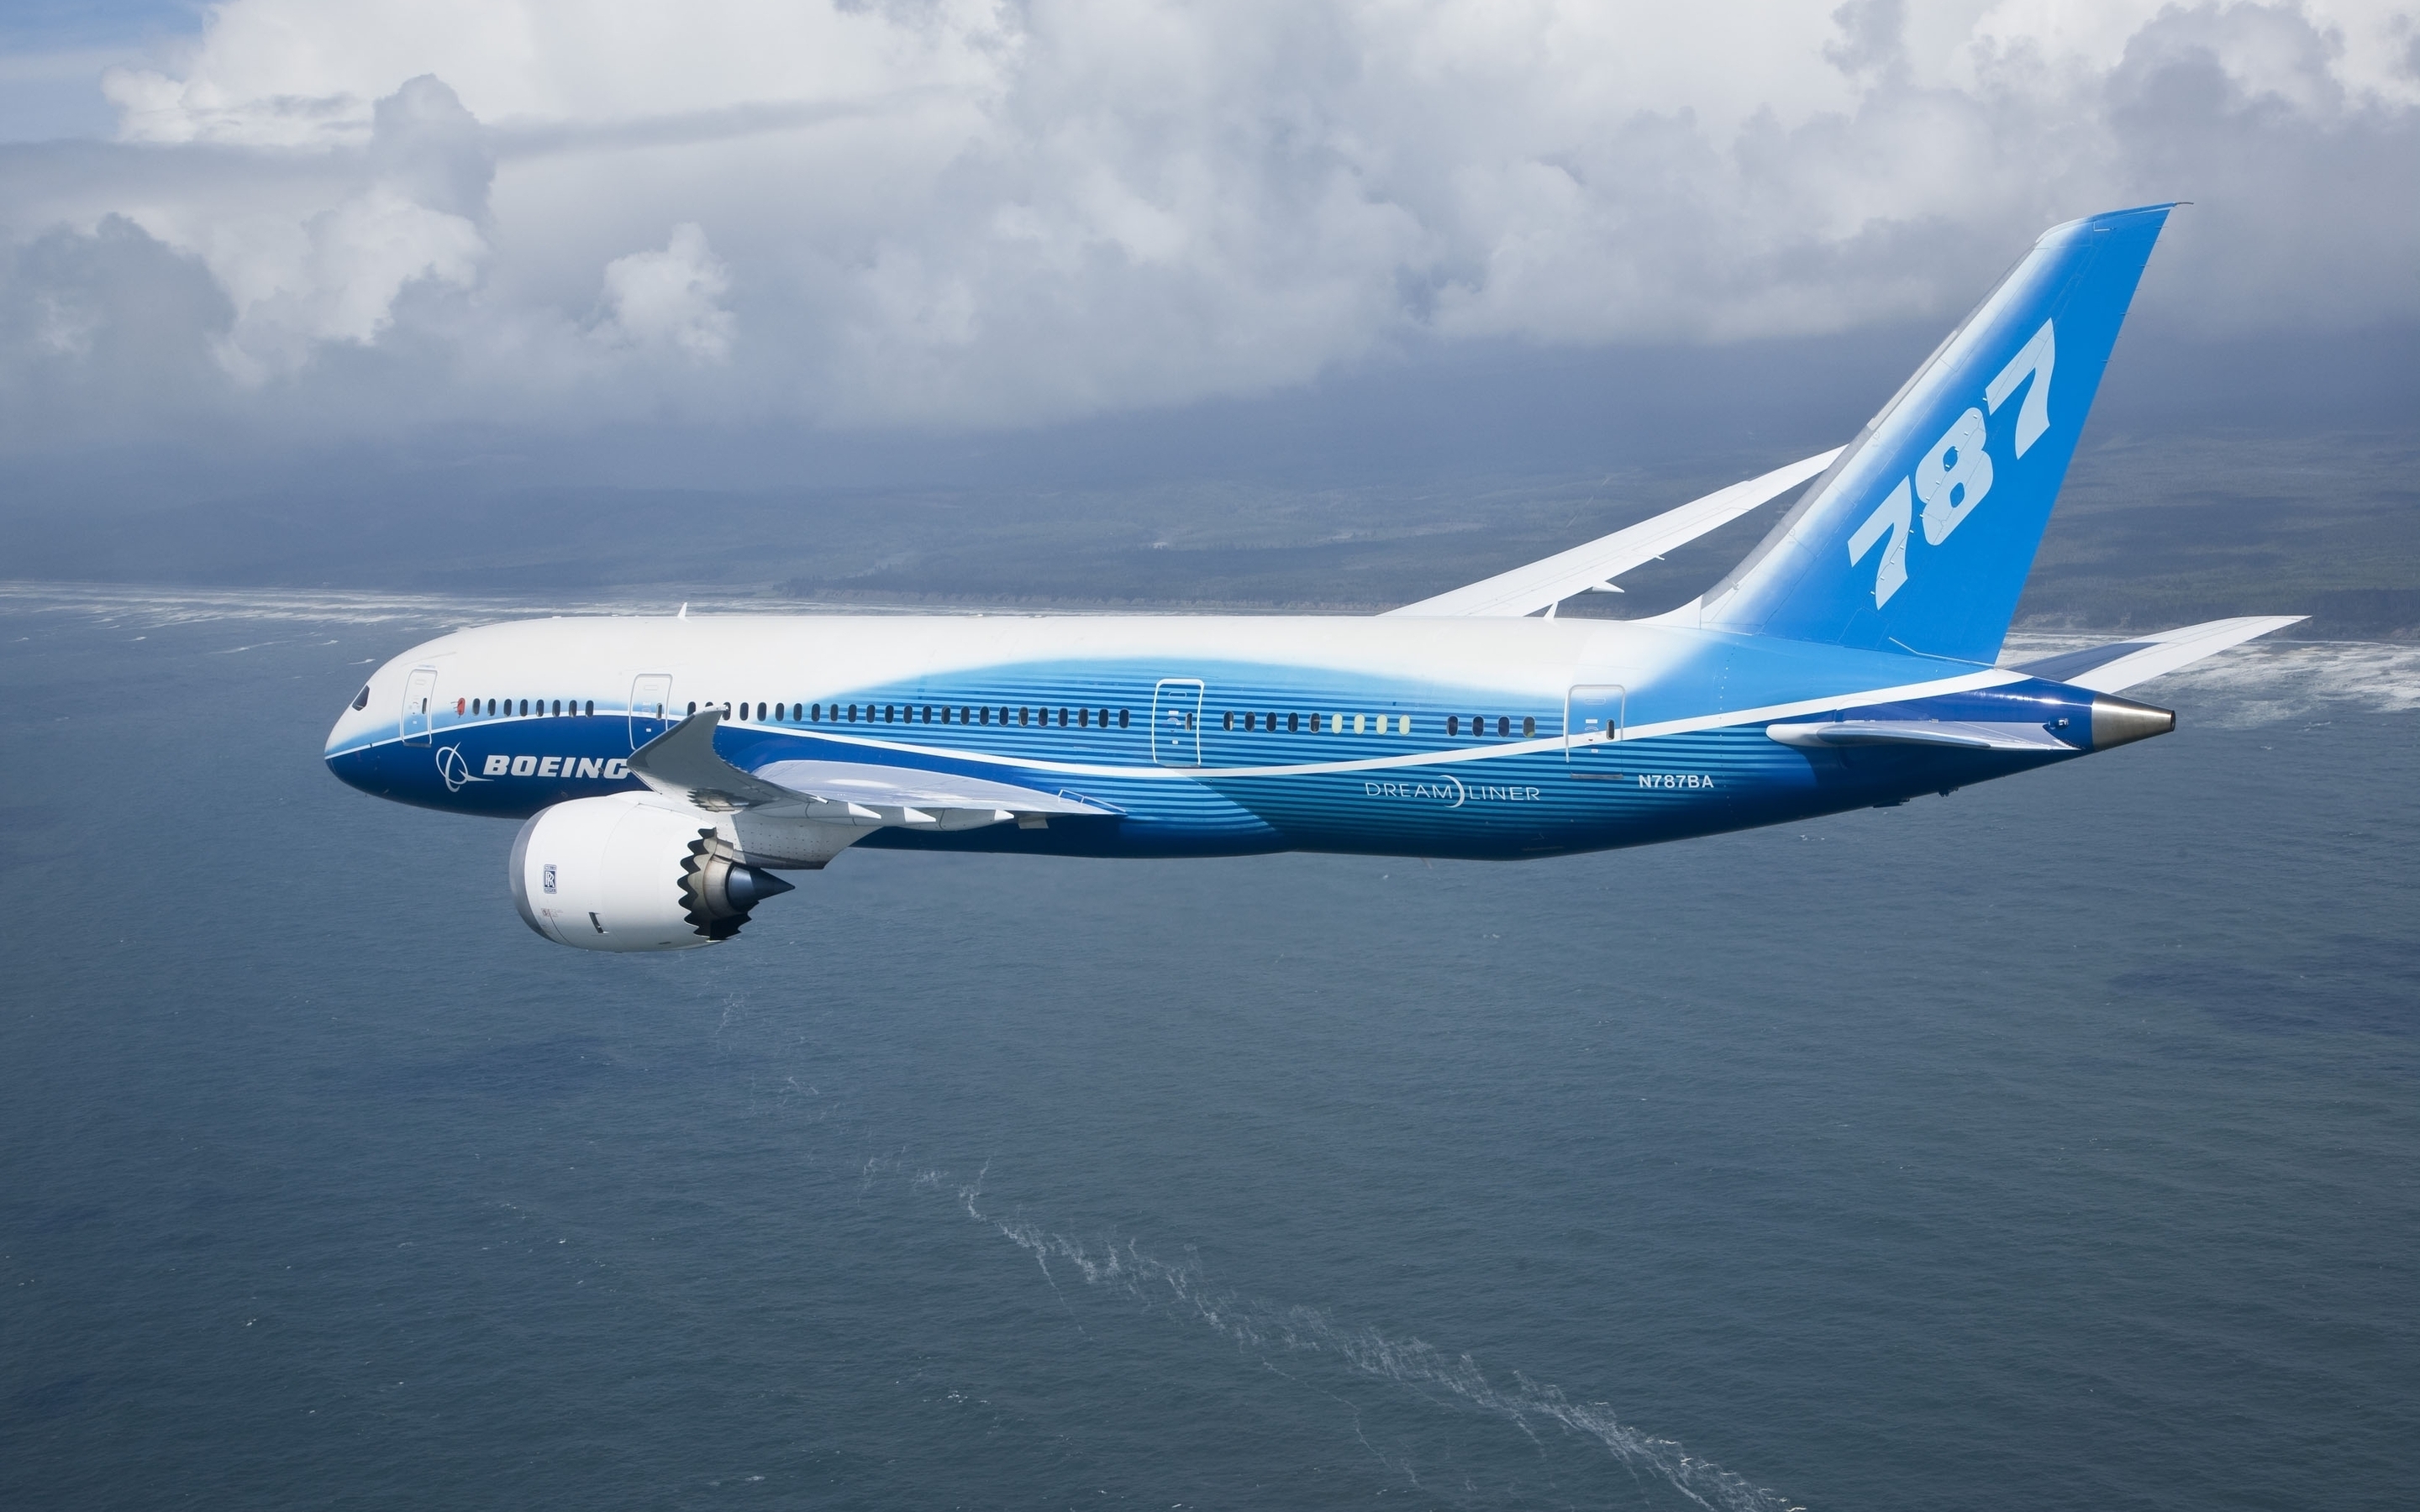 Boeing 787 Flying for 2880 x 1800 Retina Display resolution